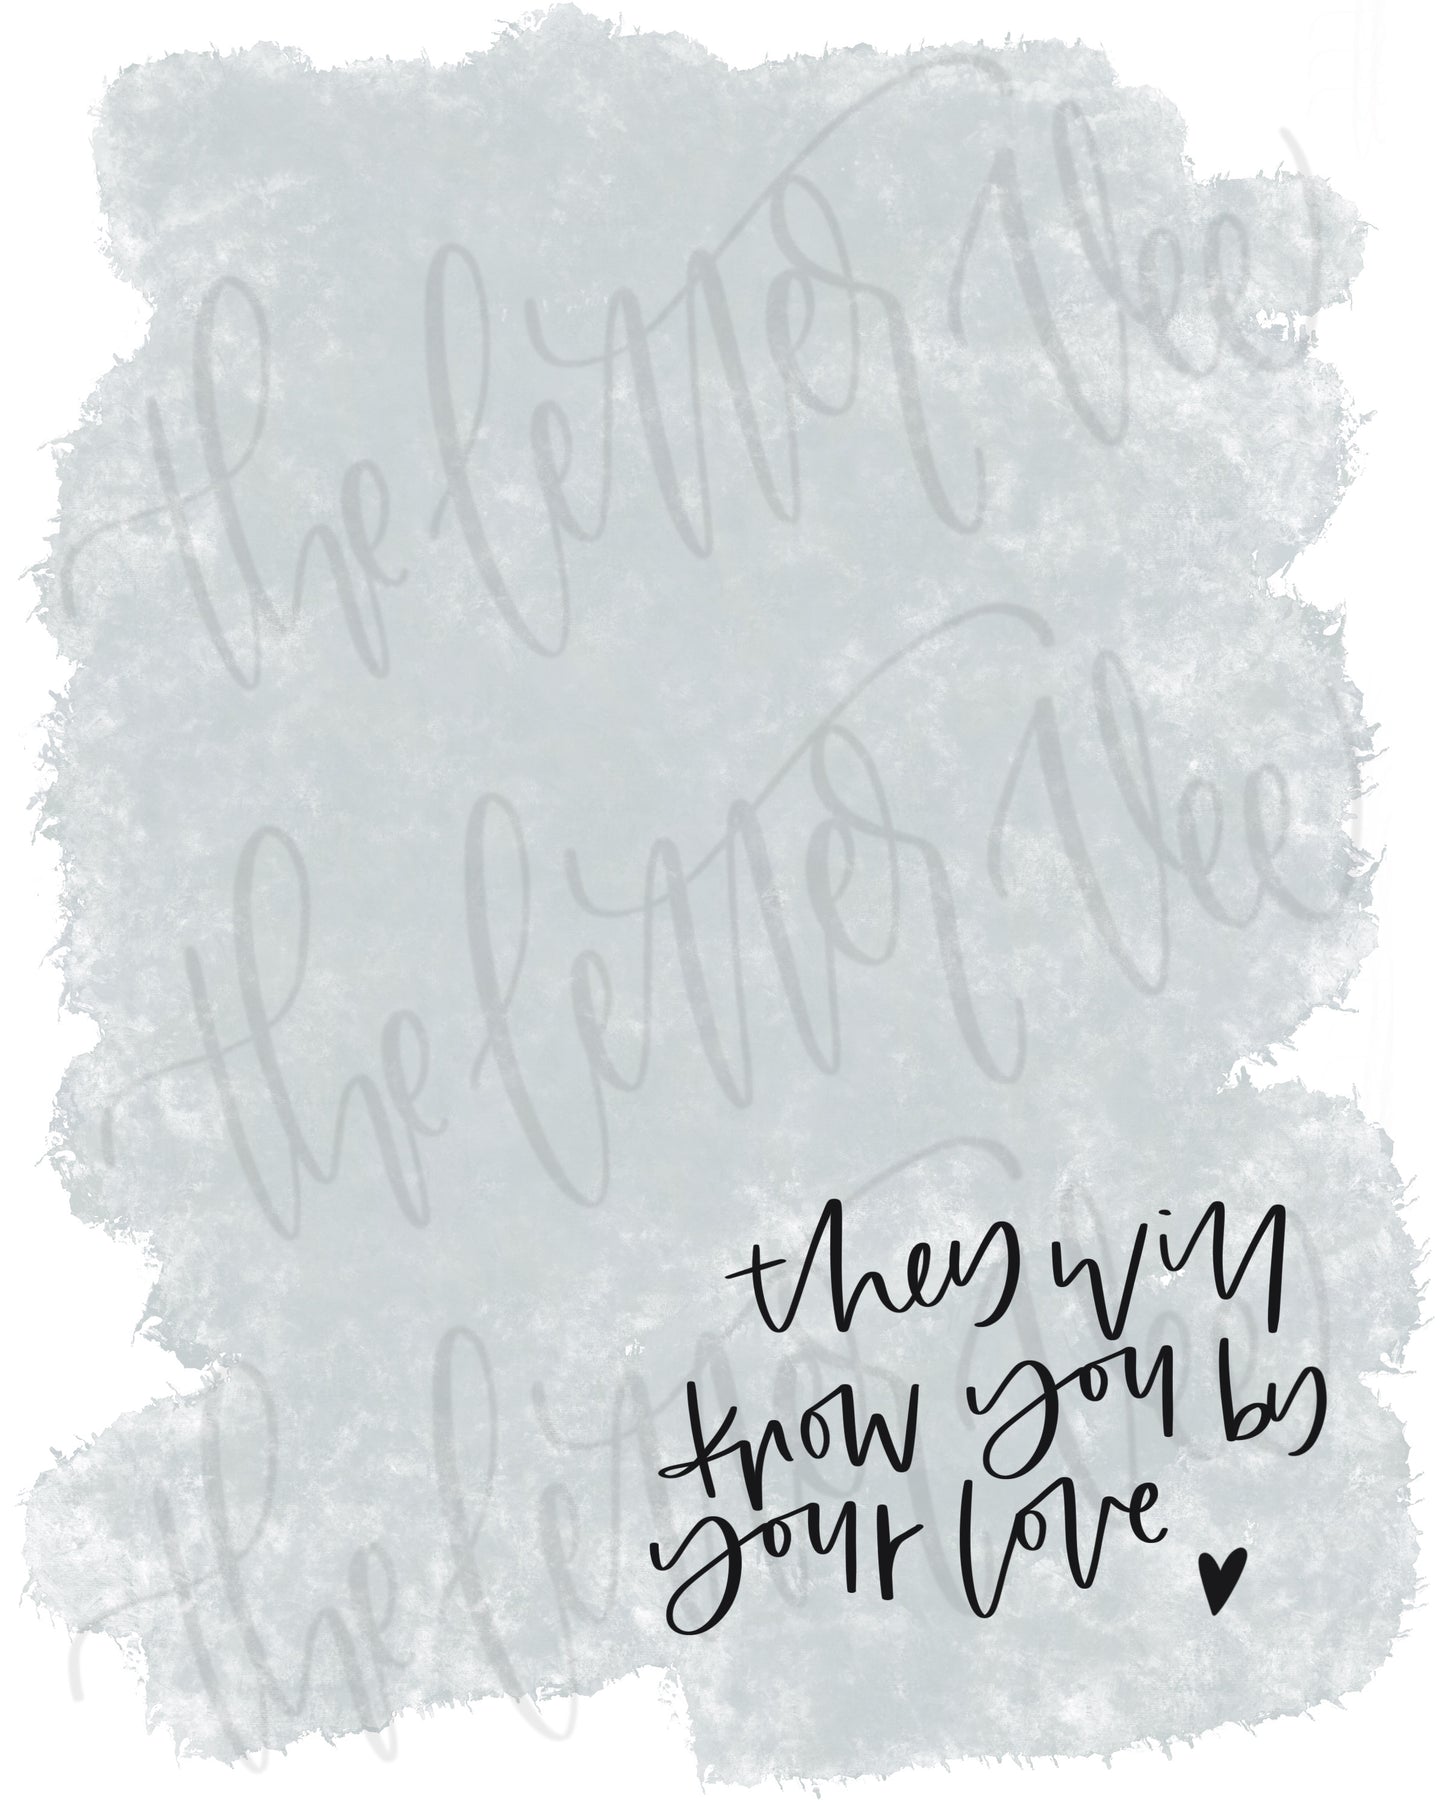 They will know you by your love | prints